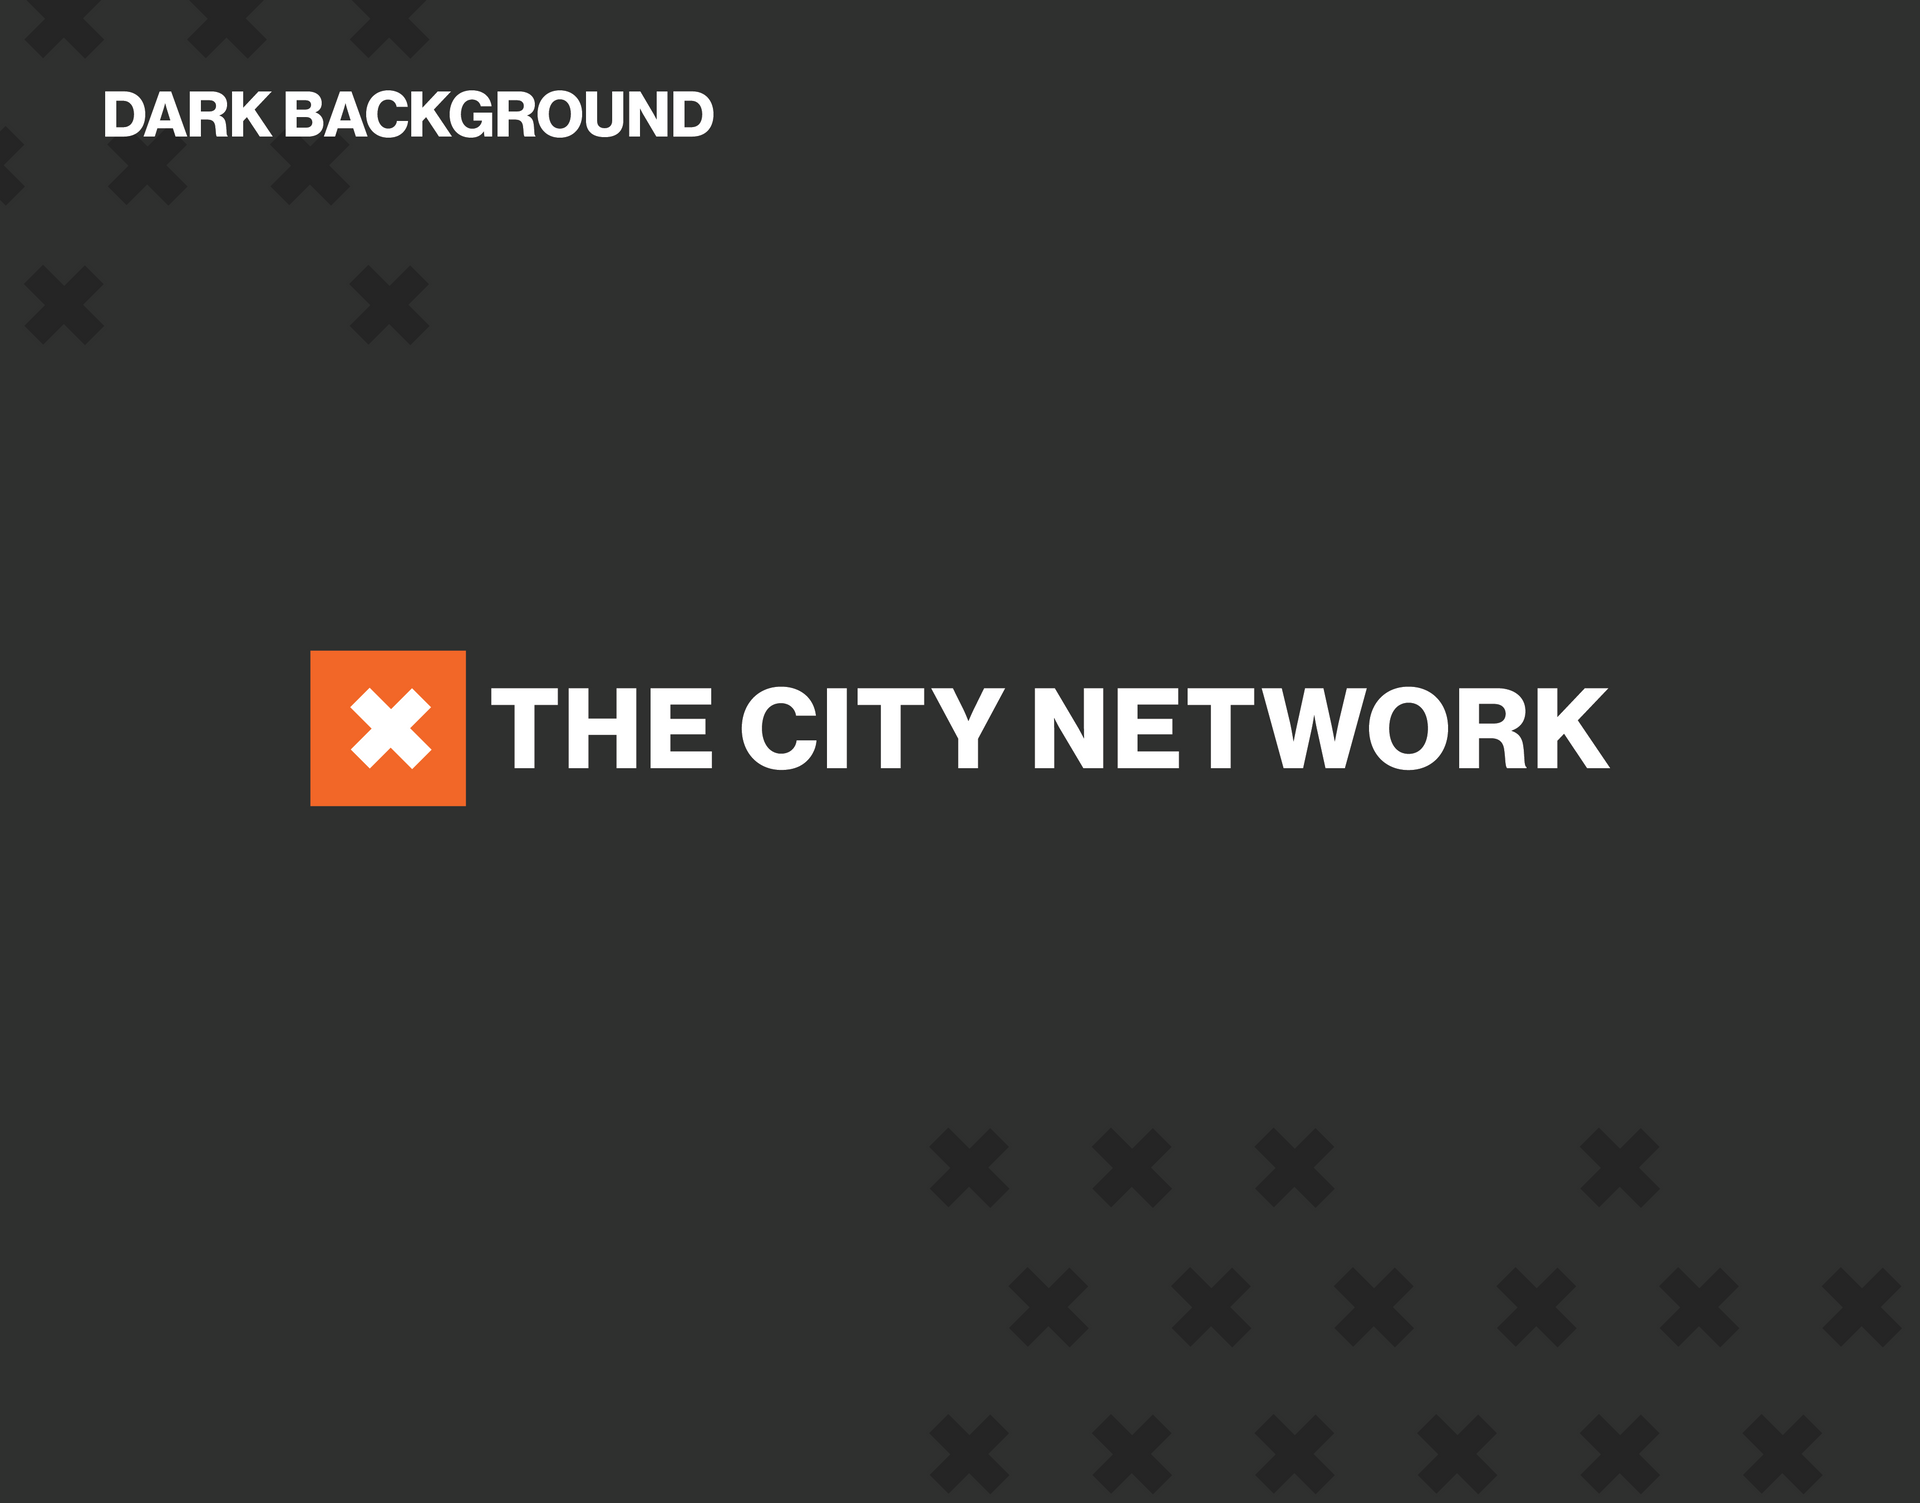 The city network logo on a dark background